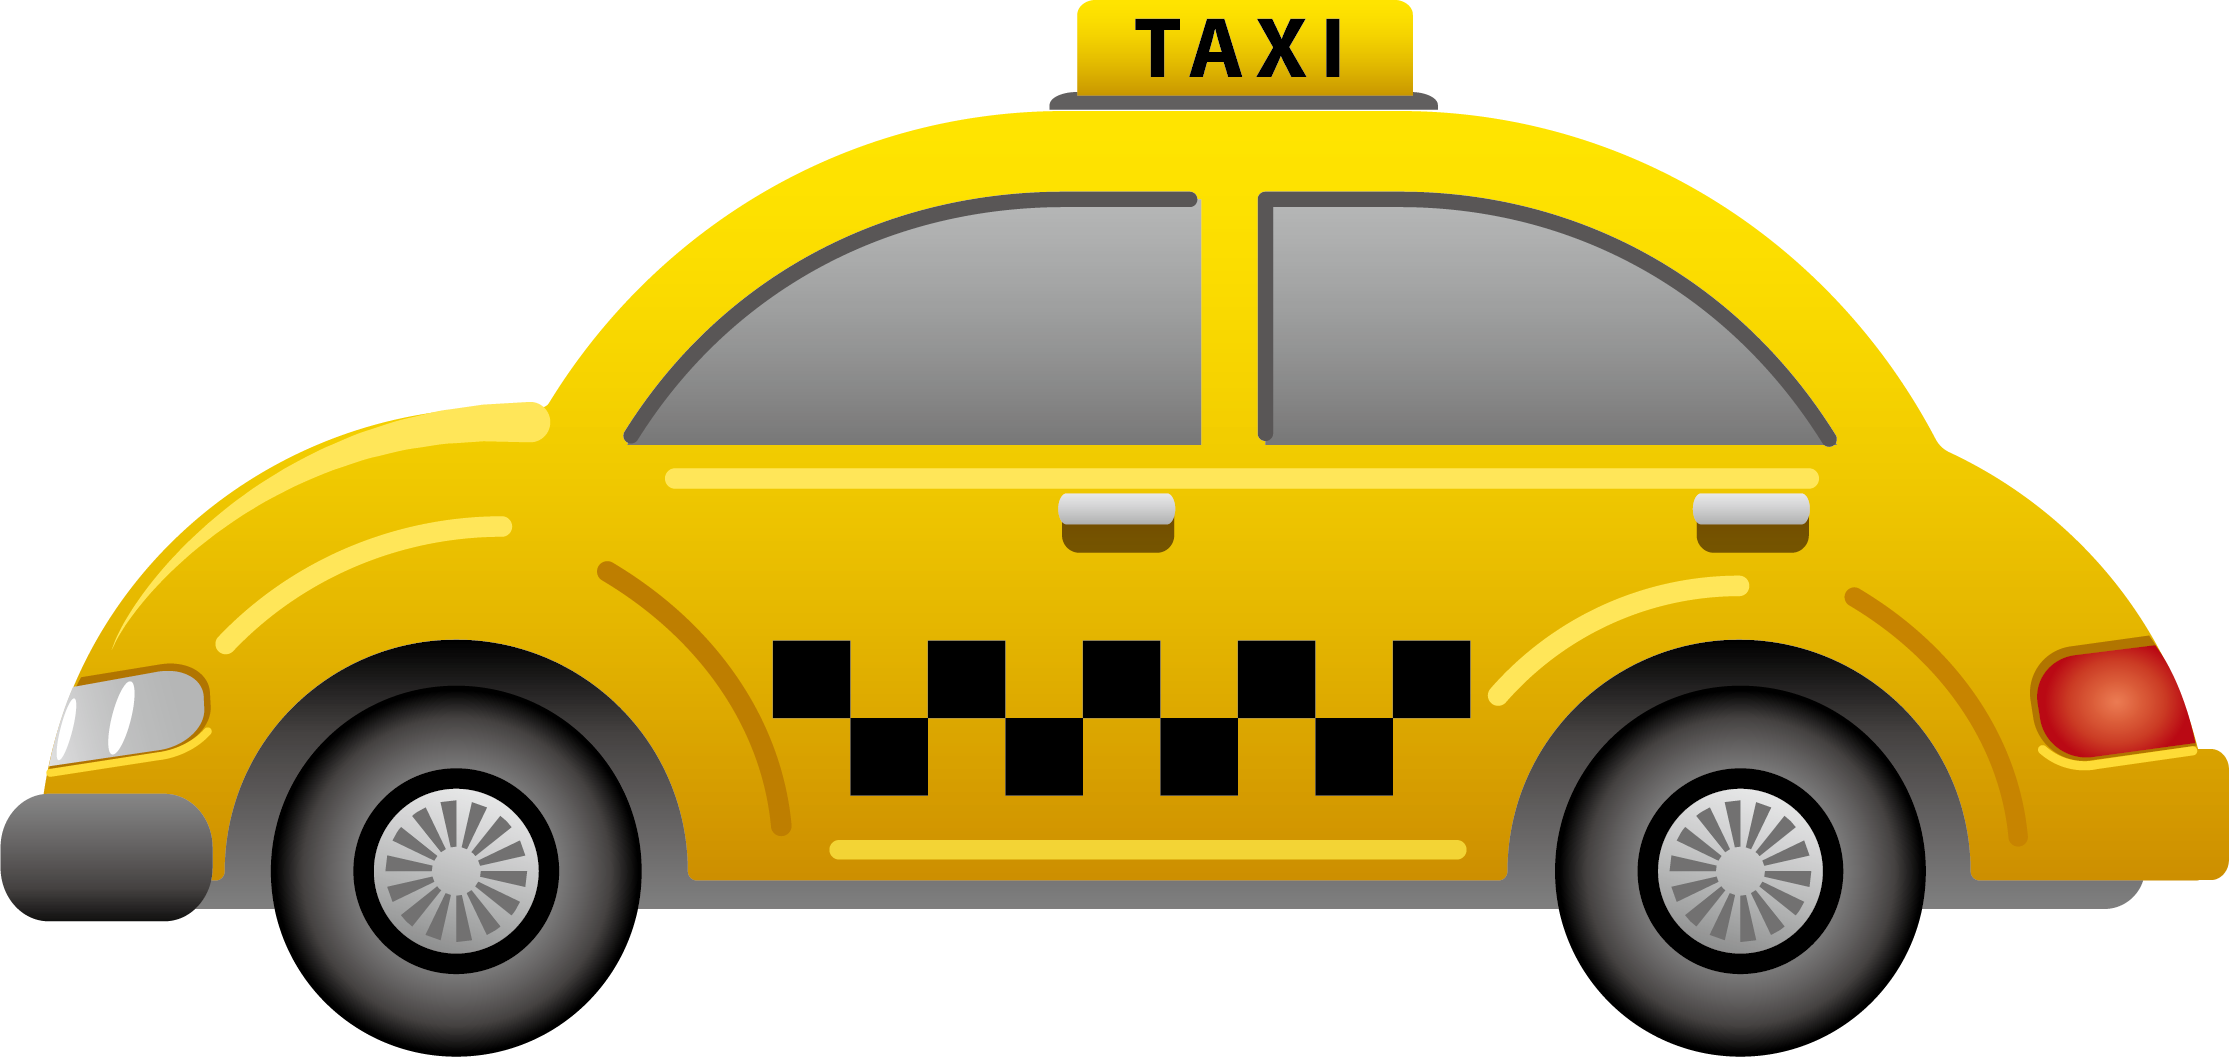 Taxi Cab PNG HD Quality